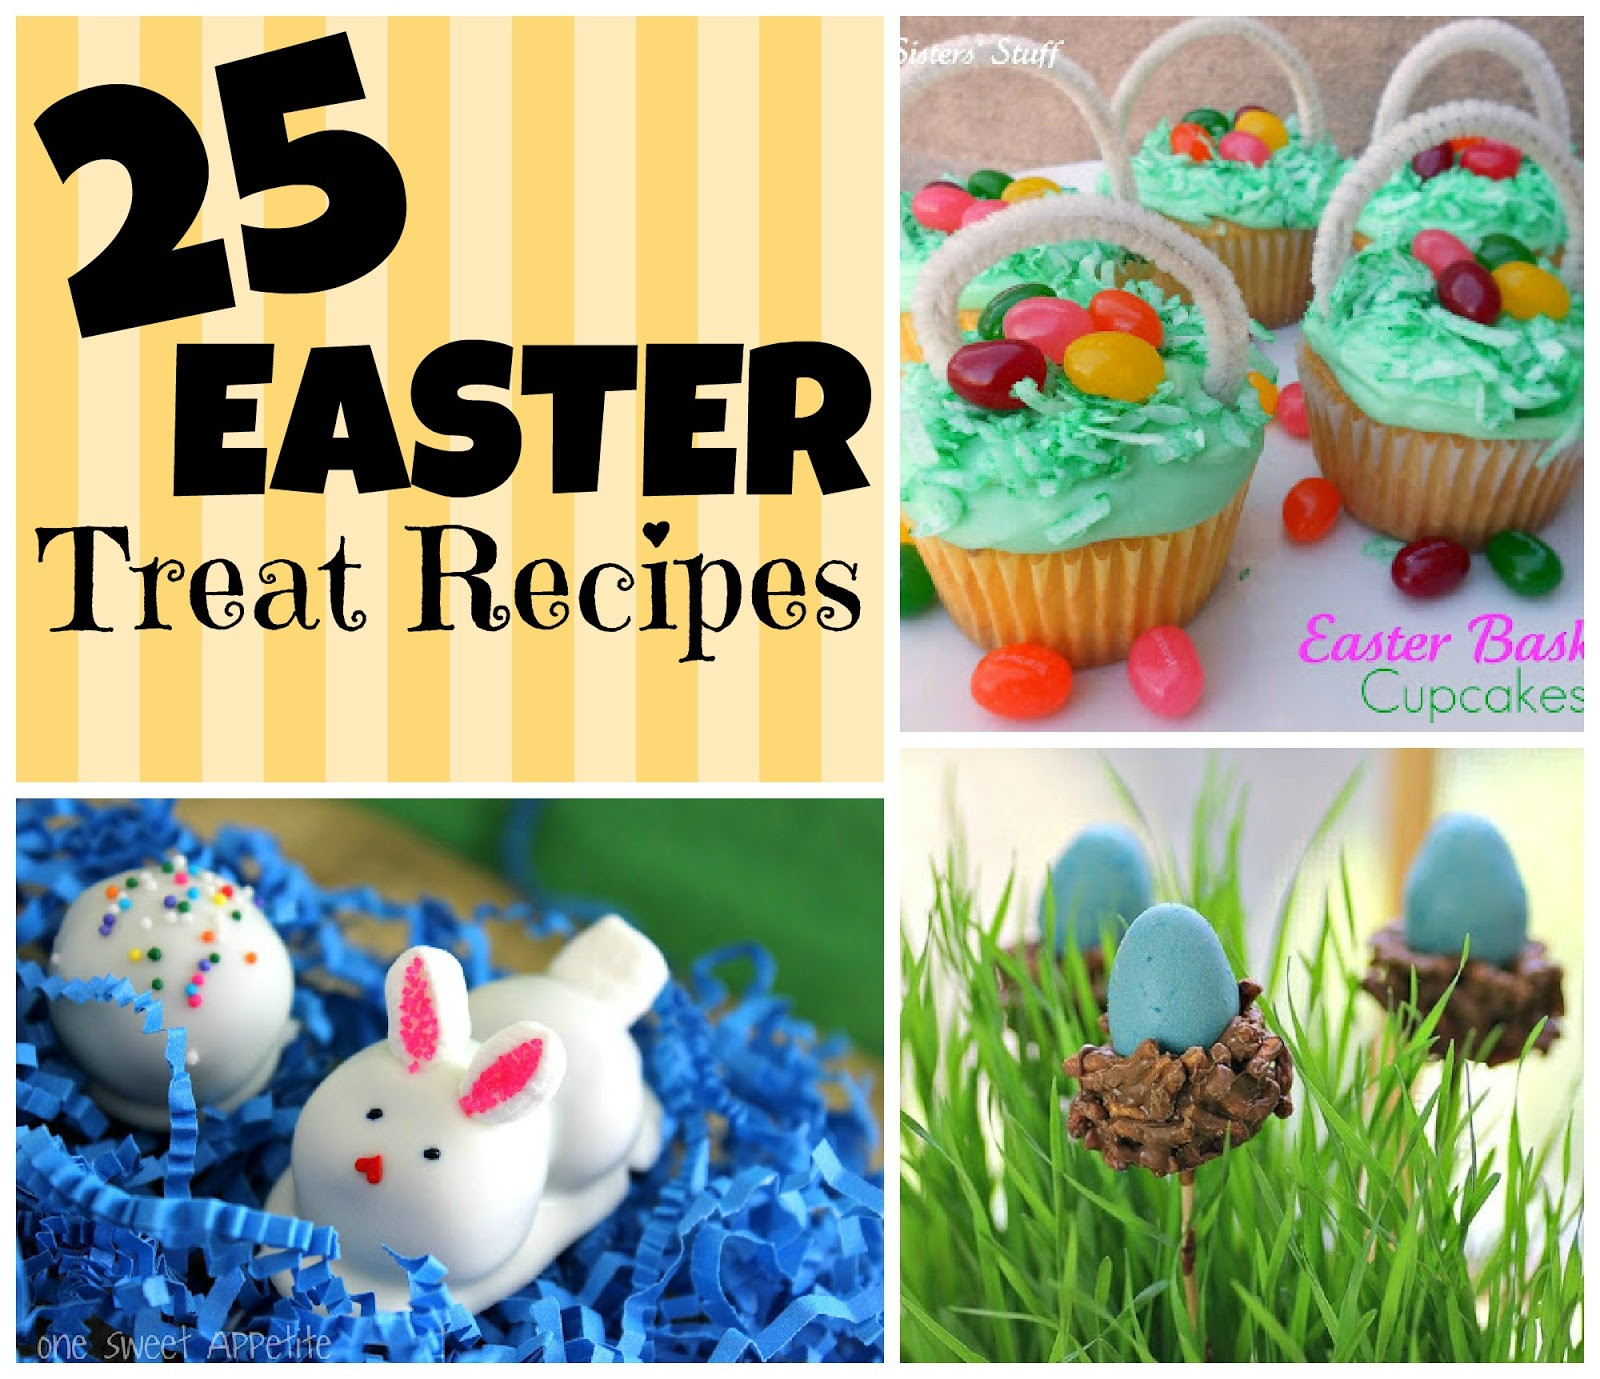 Easter Party Recipe Ideas
 25 Easter Treat Recipes